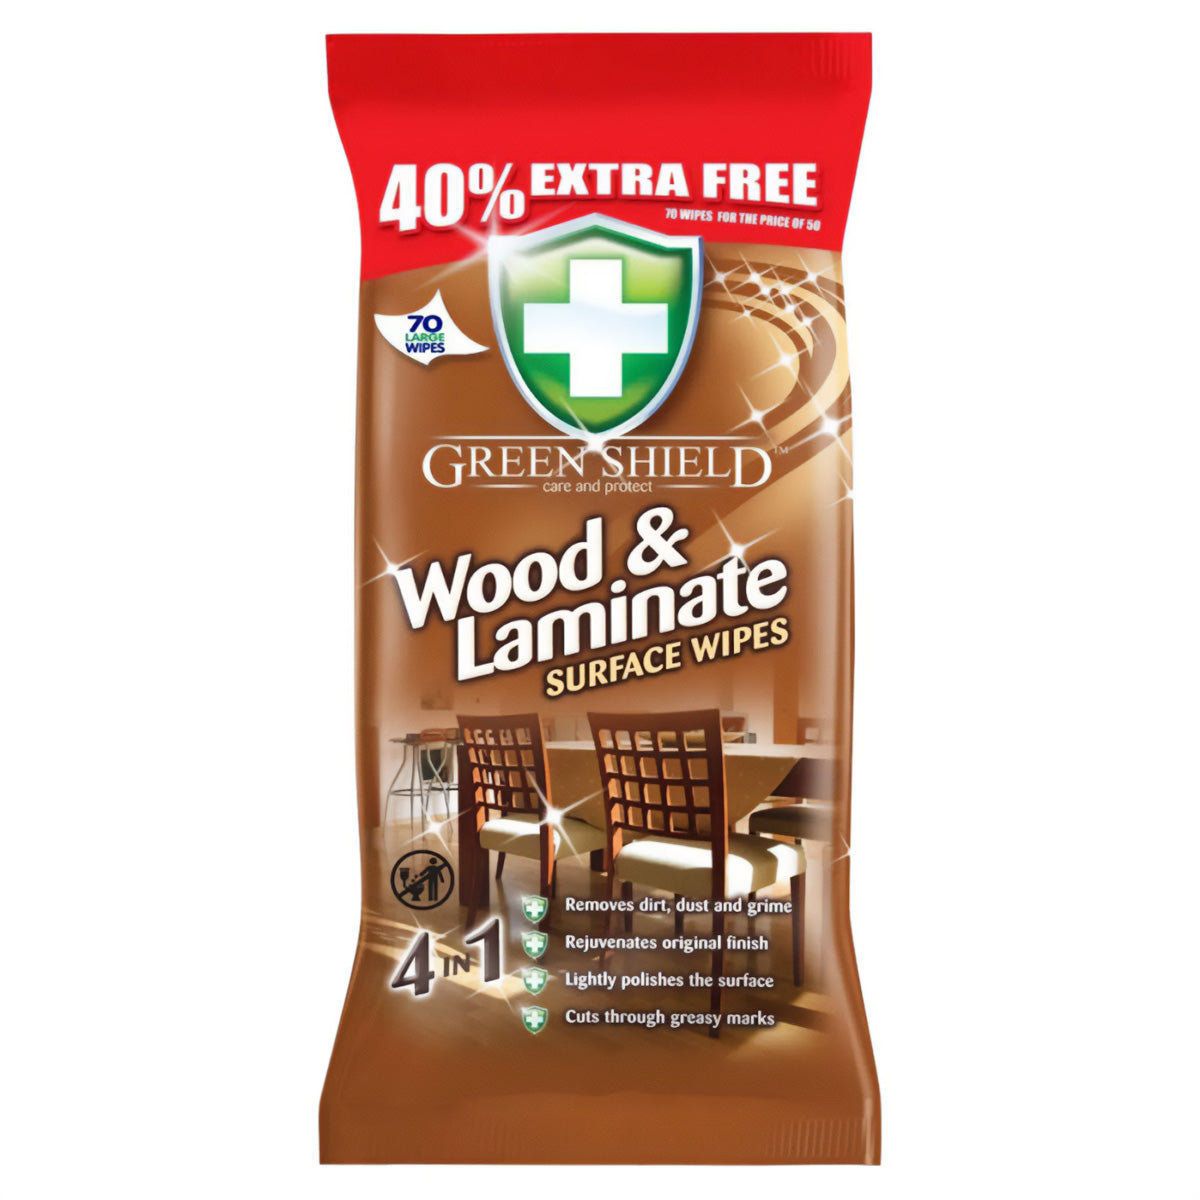 Green Shield - Wood & Laminate Wipes - 70 Wipes by Green Shield